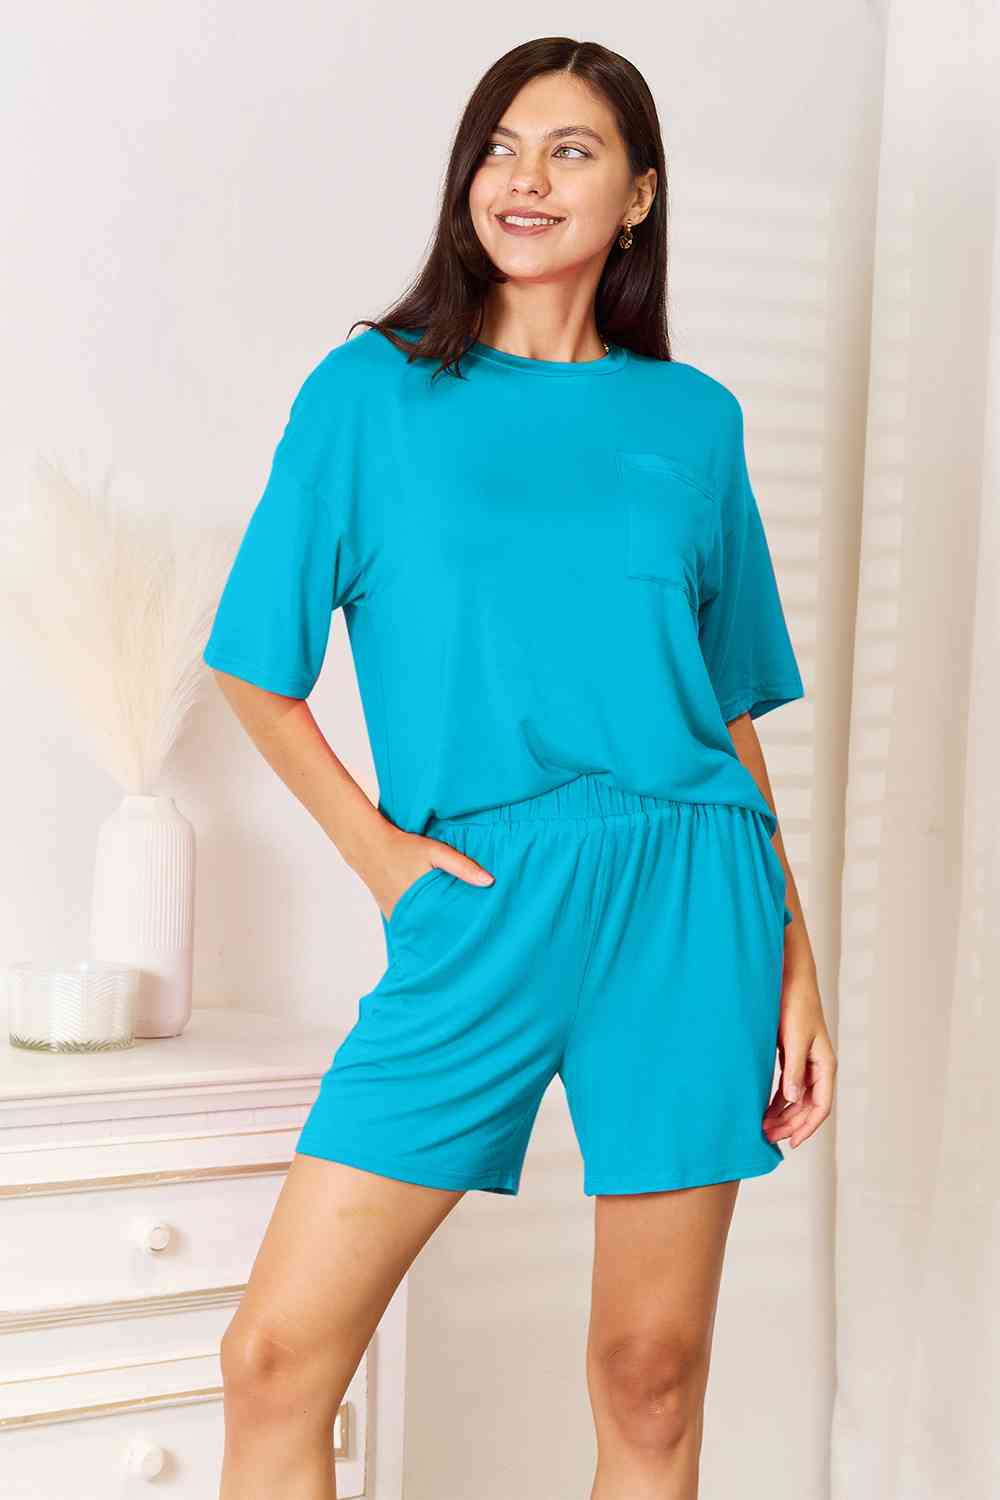 Light Sea Green Basic Bae Full Size Soft Rayon Half Sleeve Top and Shorts Set Sentient Beauty Fashions Apparel & Accessories